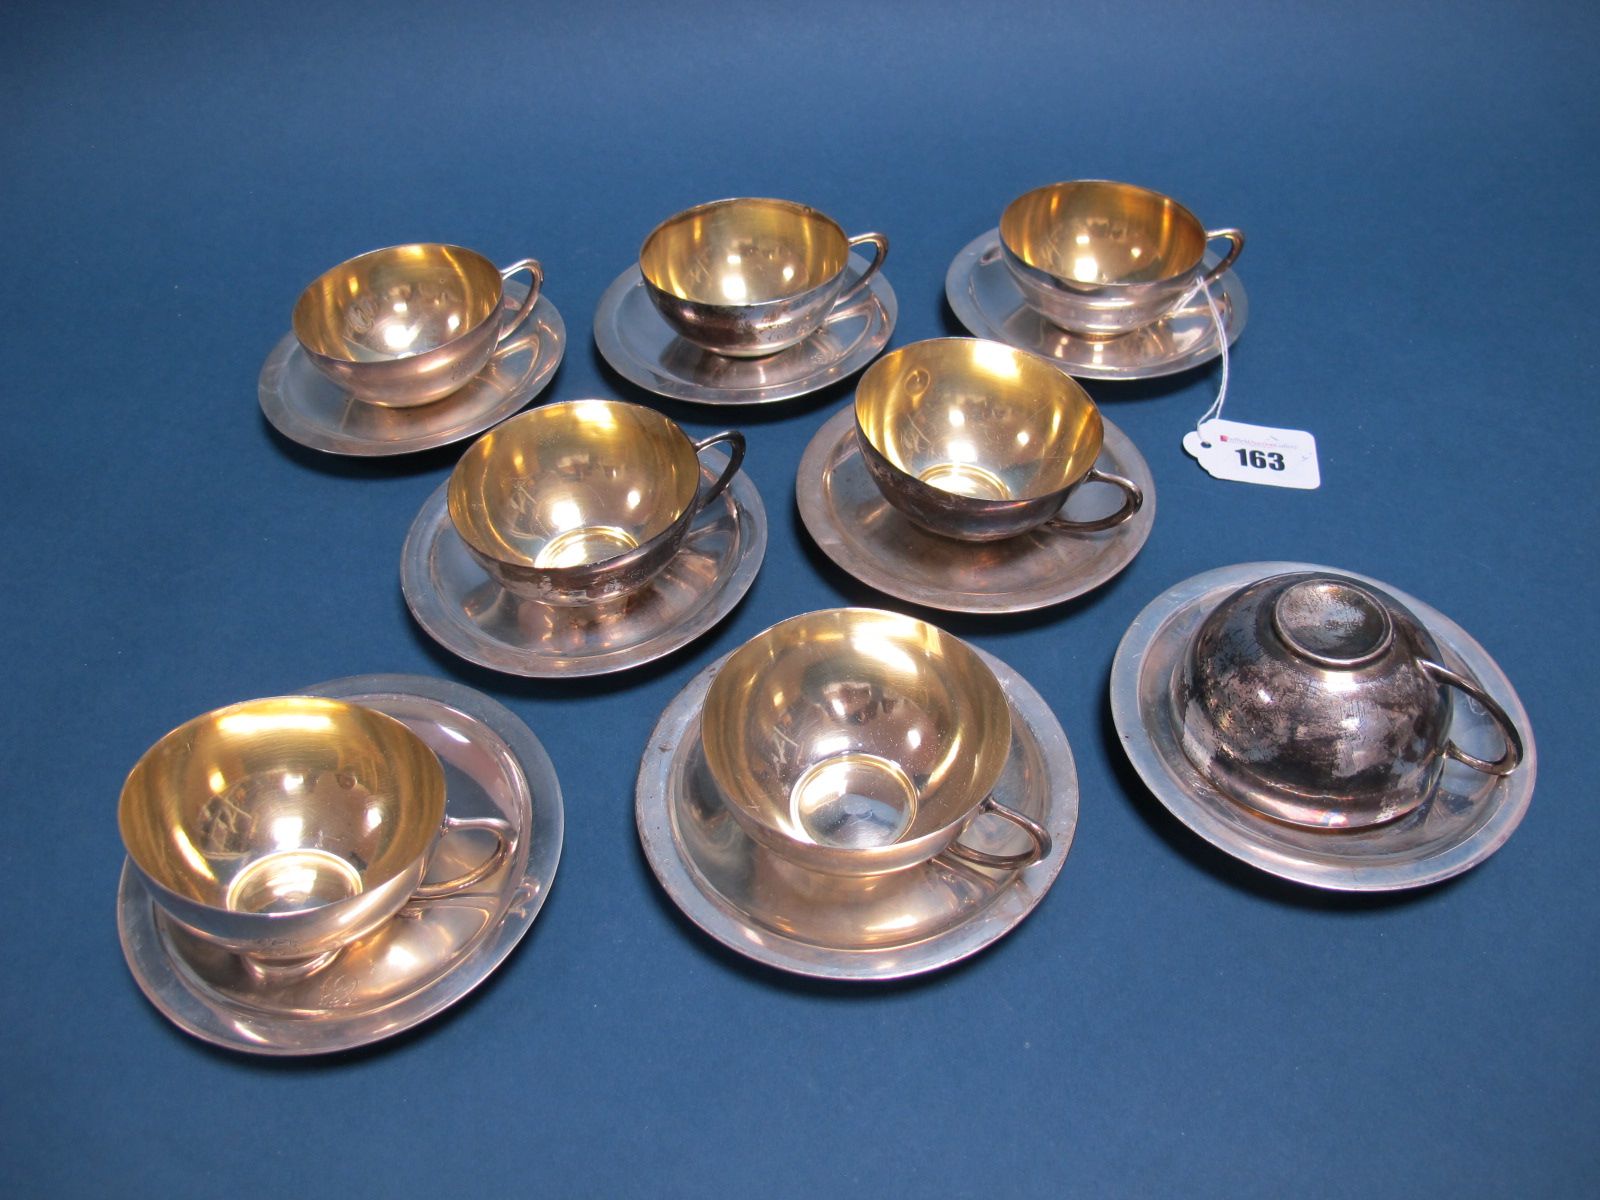 A Set of Eight Spanish Cups and Saucers, the cups gilt lined, initialled, stamped "A. Munoz" "916".